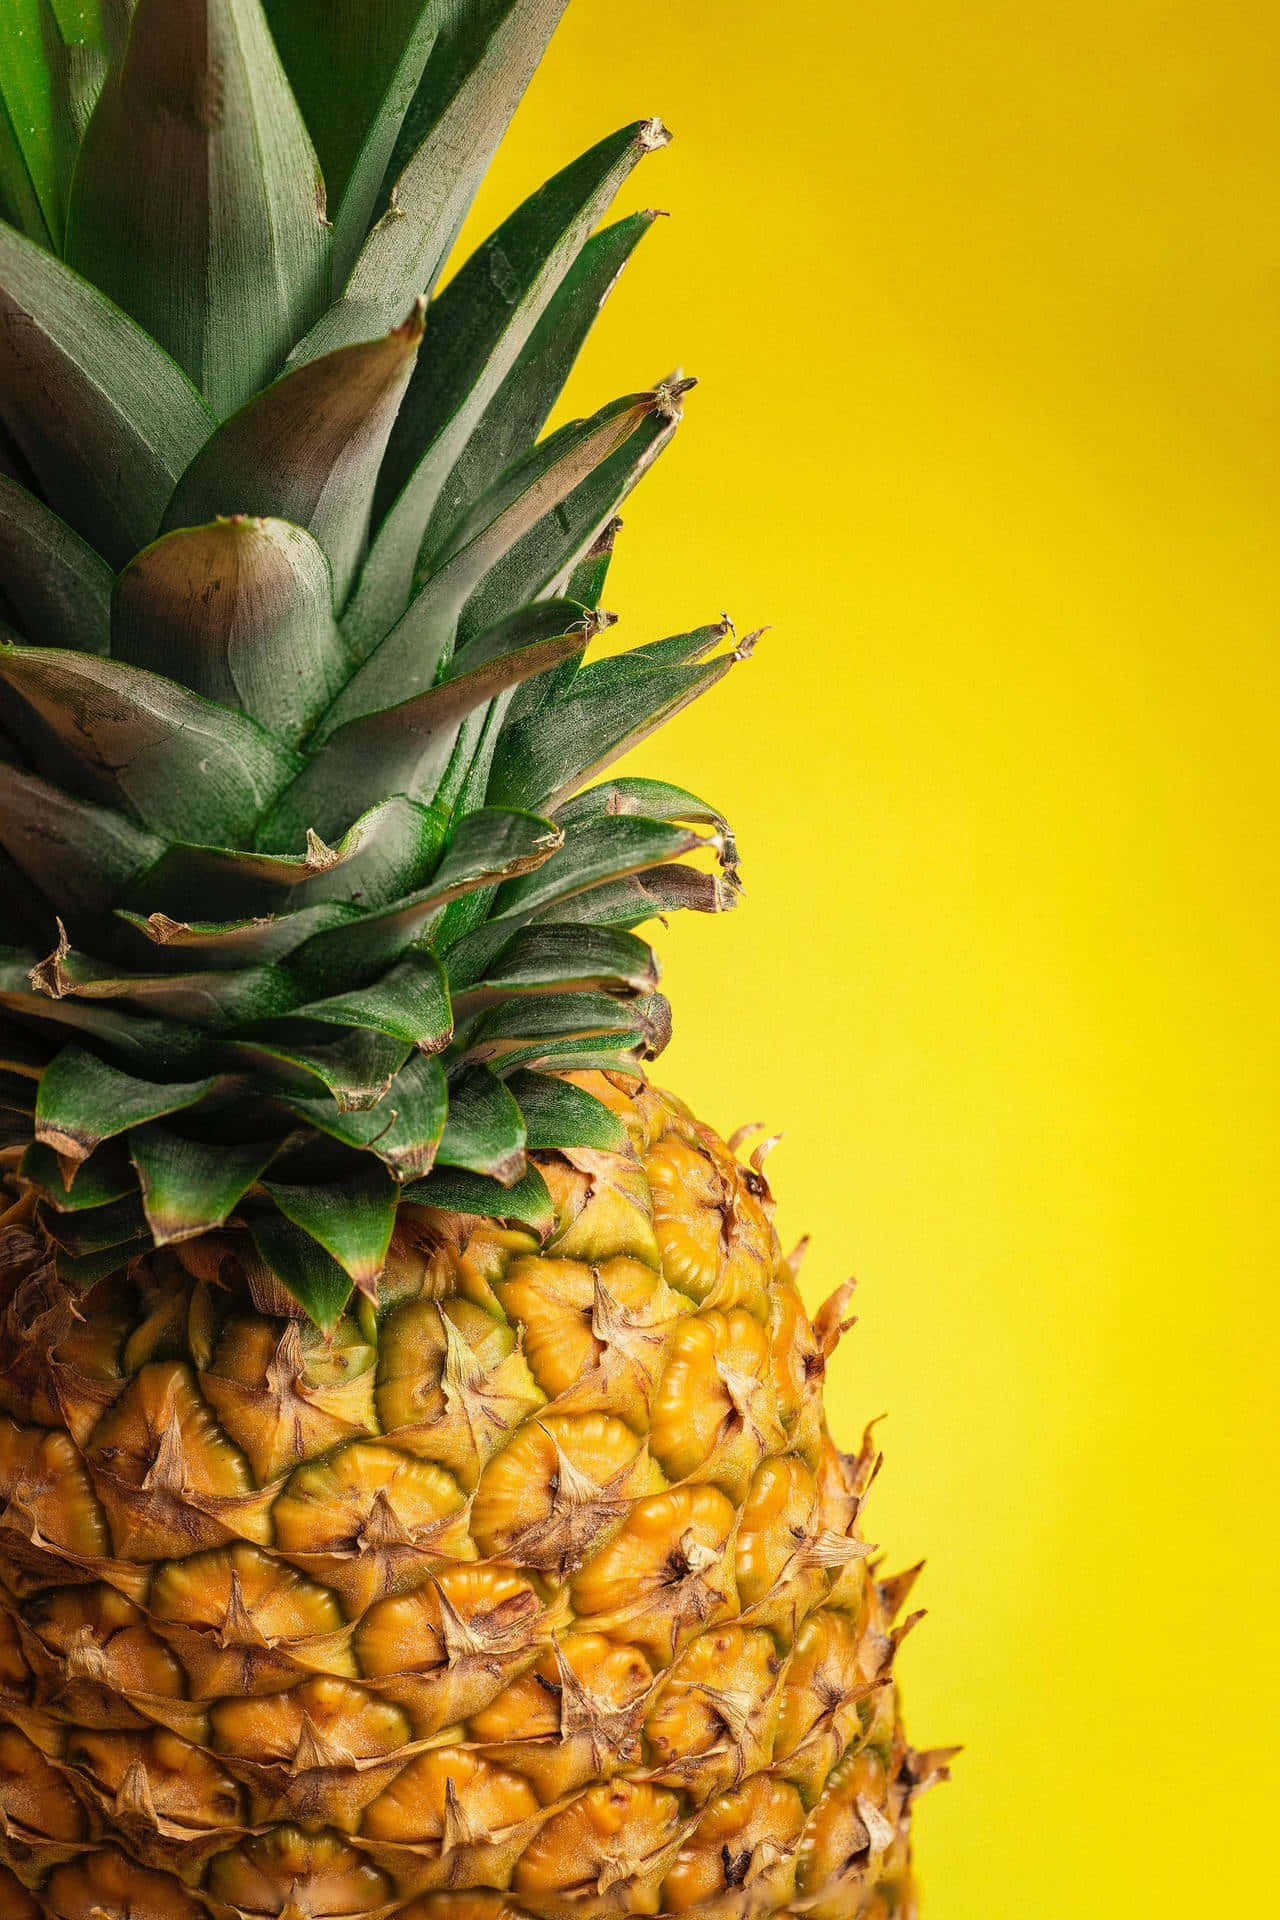 A Pineapple Is Shown On A Yellow Background